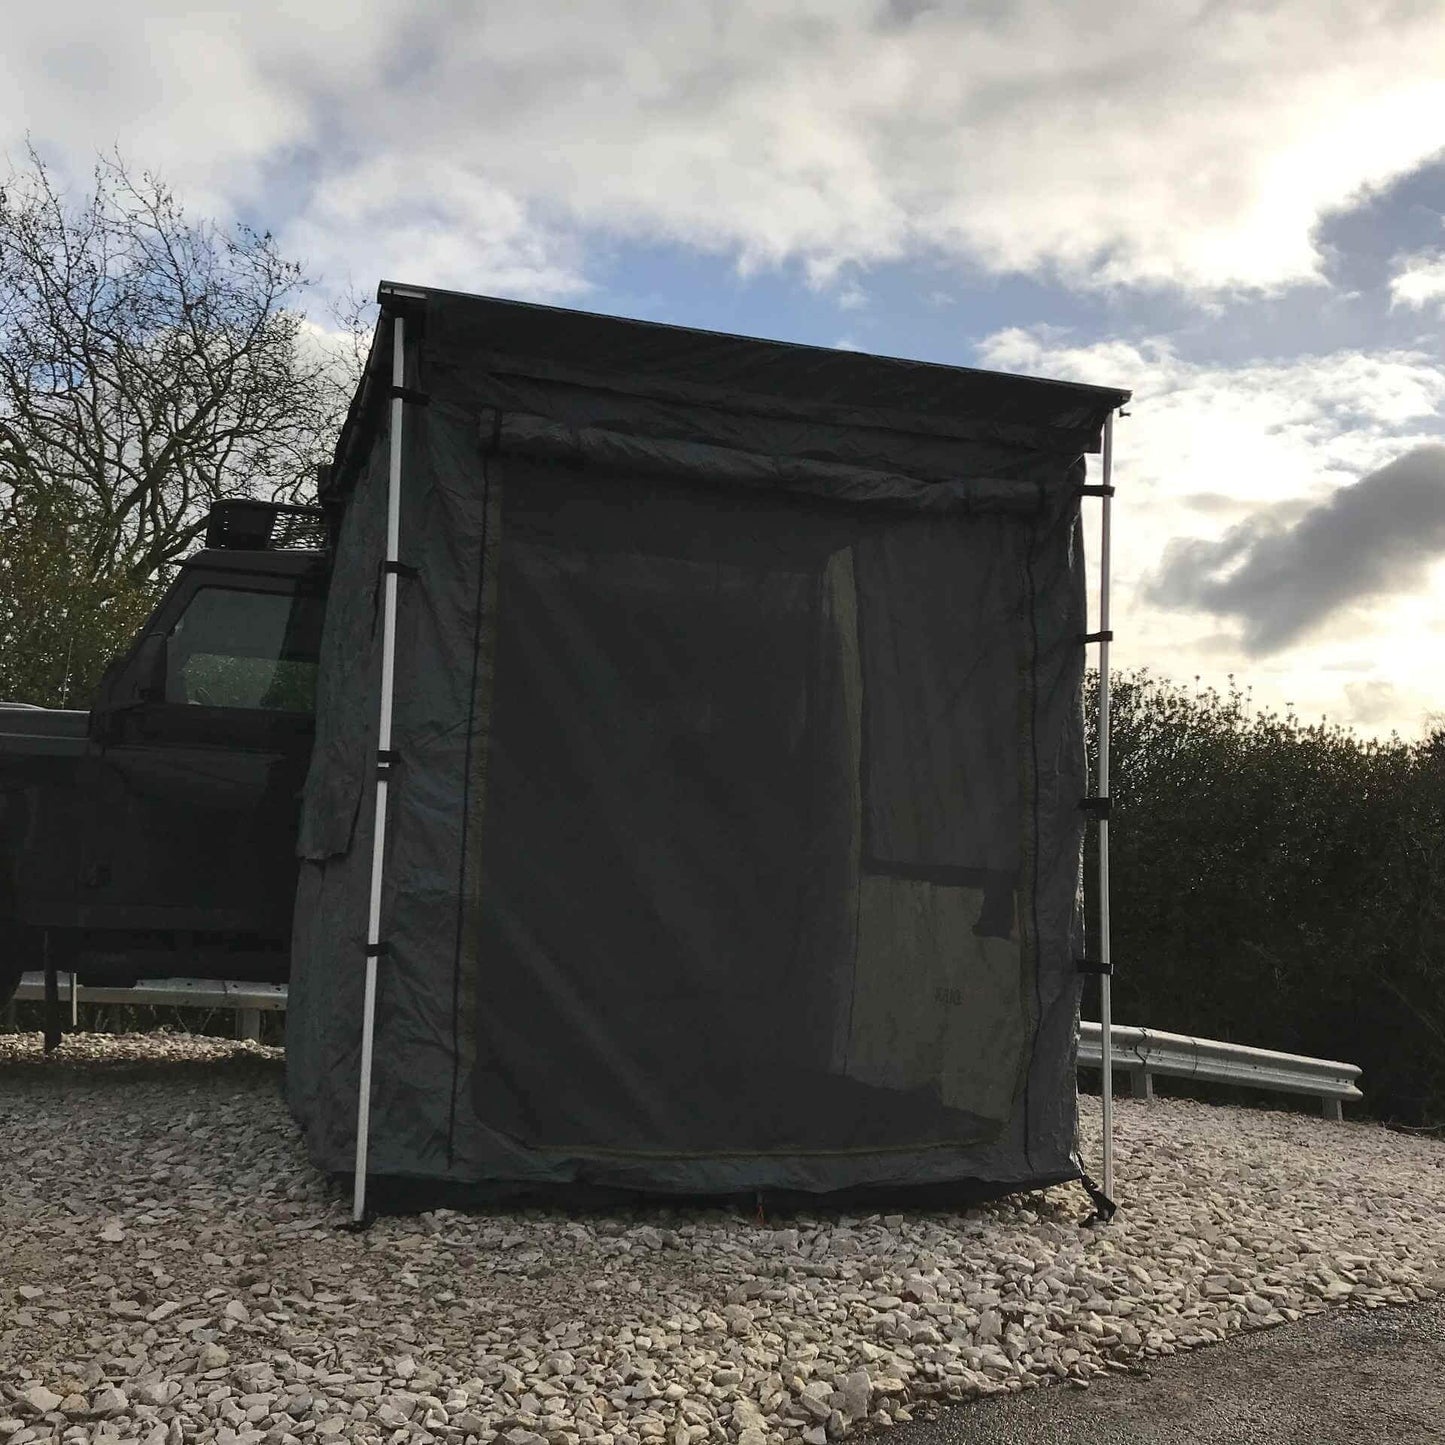 Granite Grey Awning Tent Addon for 2mx2m Direct4x4 Pull-out Side Awnings -  - sold by Direct4x4